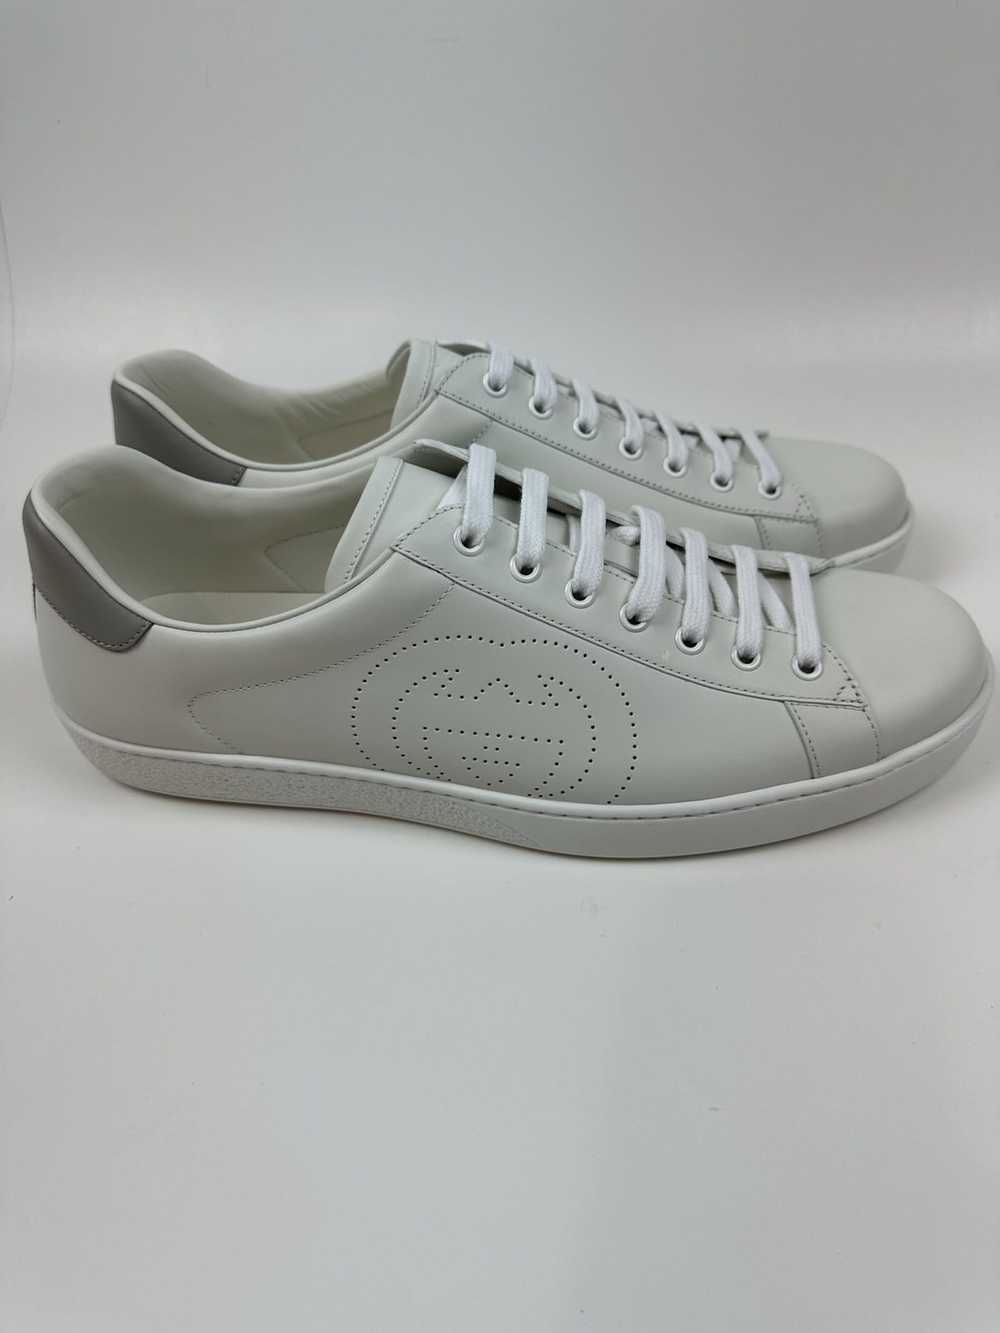 Gucci Gucci Ace Perforated GG Sneakers - image 2